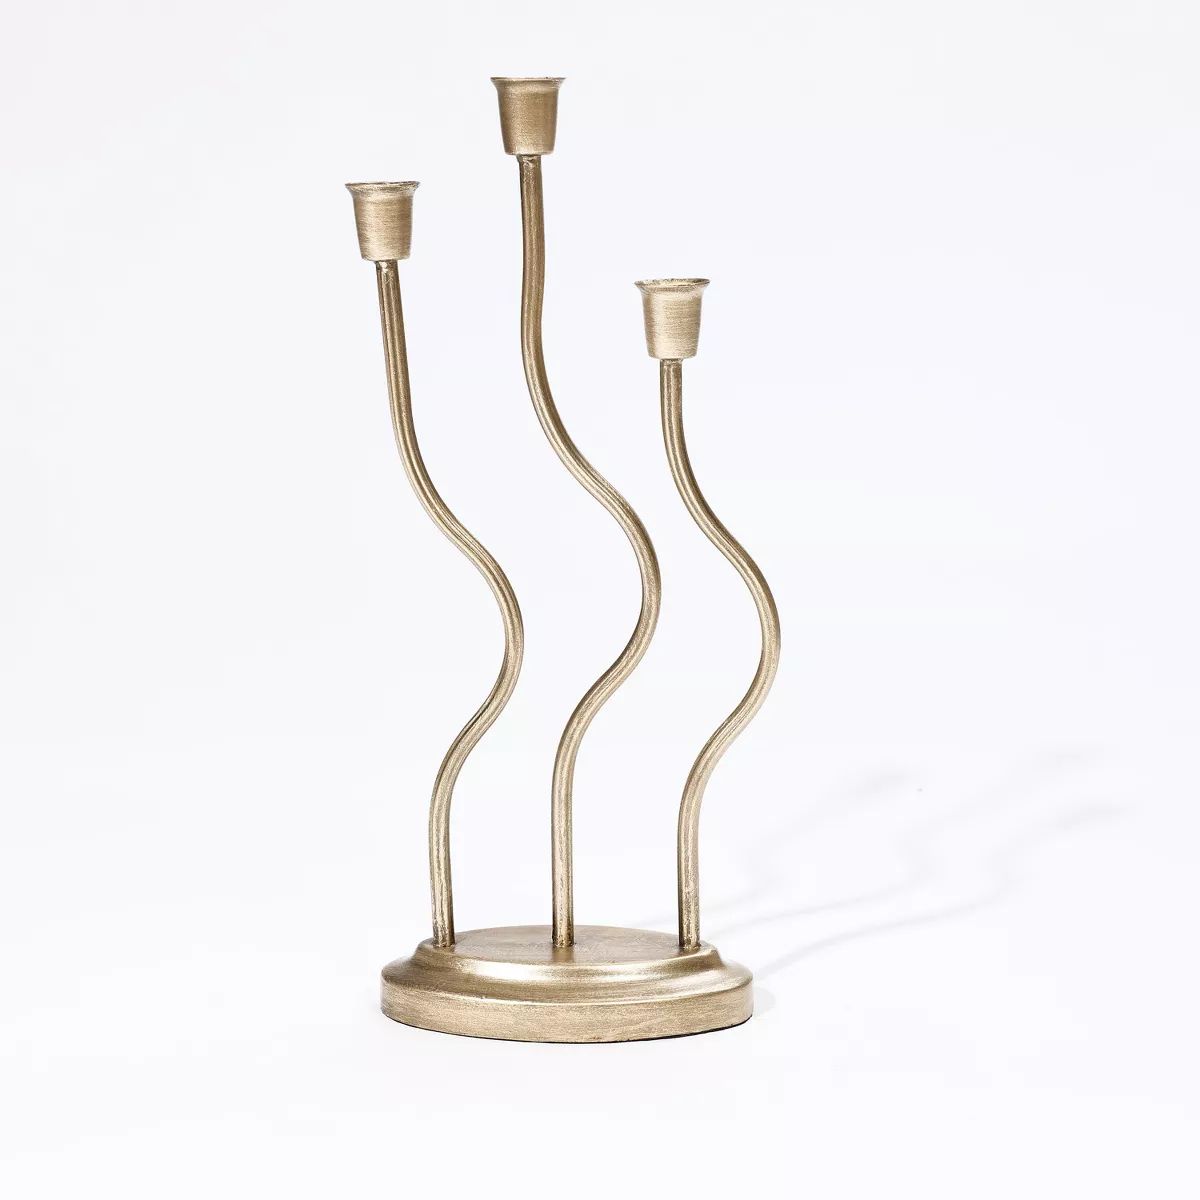 LuxenHome Gold Metal 3-Taper Candle Holder Tabletop Sculpture | Target